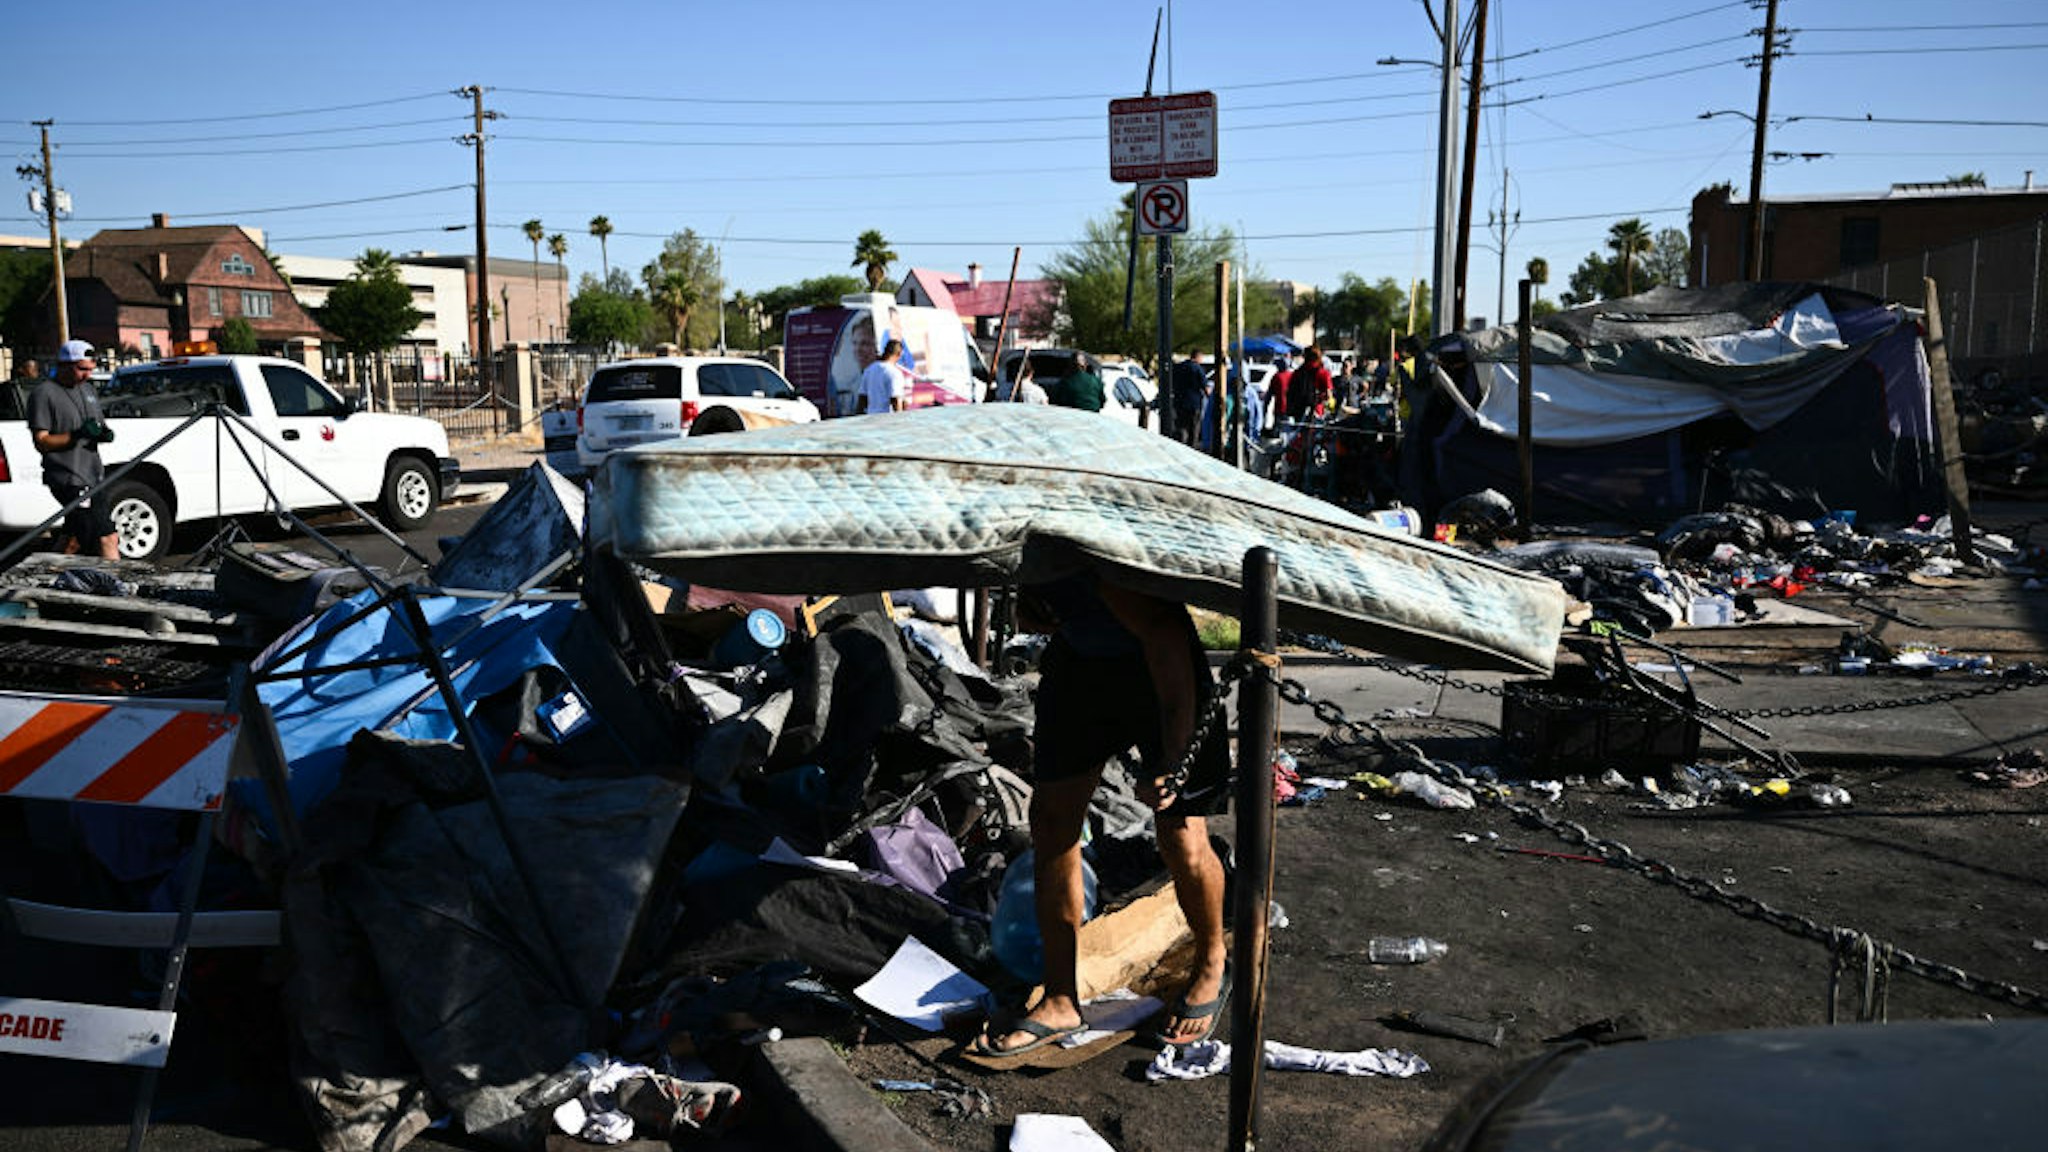 TOPSHOT - A person carries a mattress from a tent during a sweep of encampments from a street block in "The Zone," a vast homeless encampment where hundreds of people reside, during a record heat wave in Phoenix, Arizona on July 19, 2023. Phoenix, like much of the US southwest, is surrounded by desert and its 1.6 million residents are used to brutal summer temperatures. But this year's heat wave is unprecedented in its length: it has already surpassed the previous record of 18 straight days at or above 110 degrees Fahrenheit (43 degrees Celsius), with similar highs forecasted into next week. And as global warming fuels more frequent extreme weather events, homeless people are increasingly vulnerable to the elements. (Photo by Patrick T. Fallon / AFP) (Photo by PATRICK T. FALLON/AFP via Getty Images)